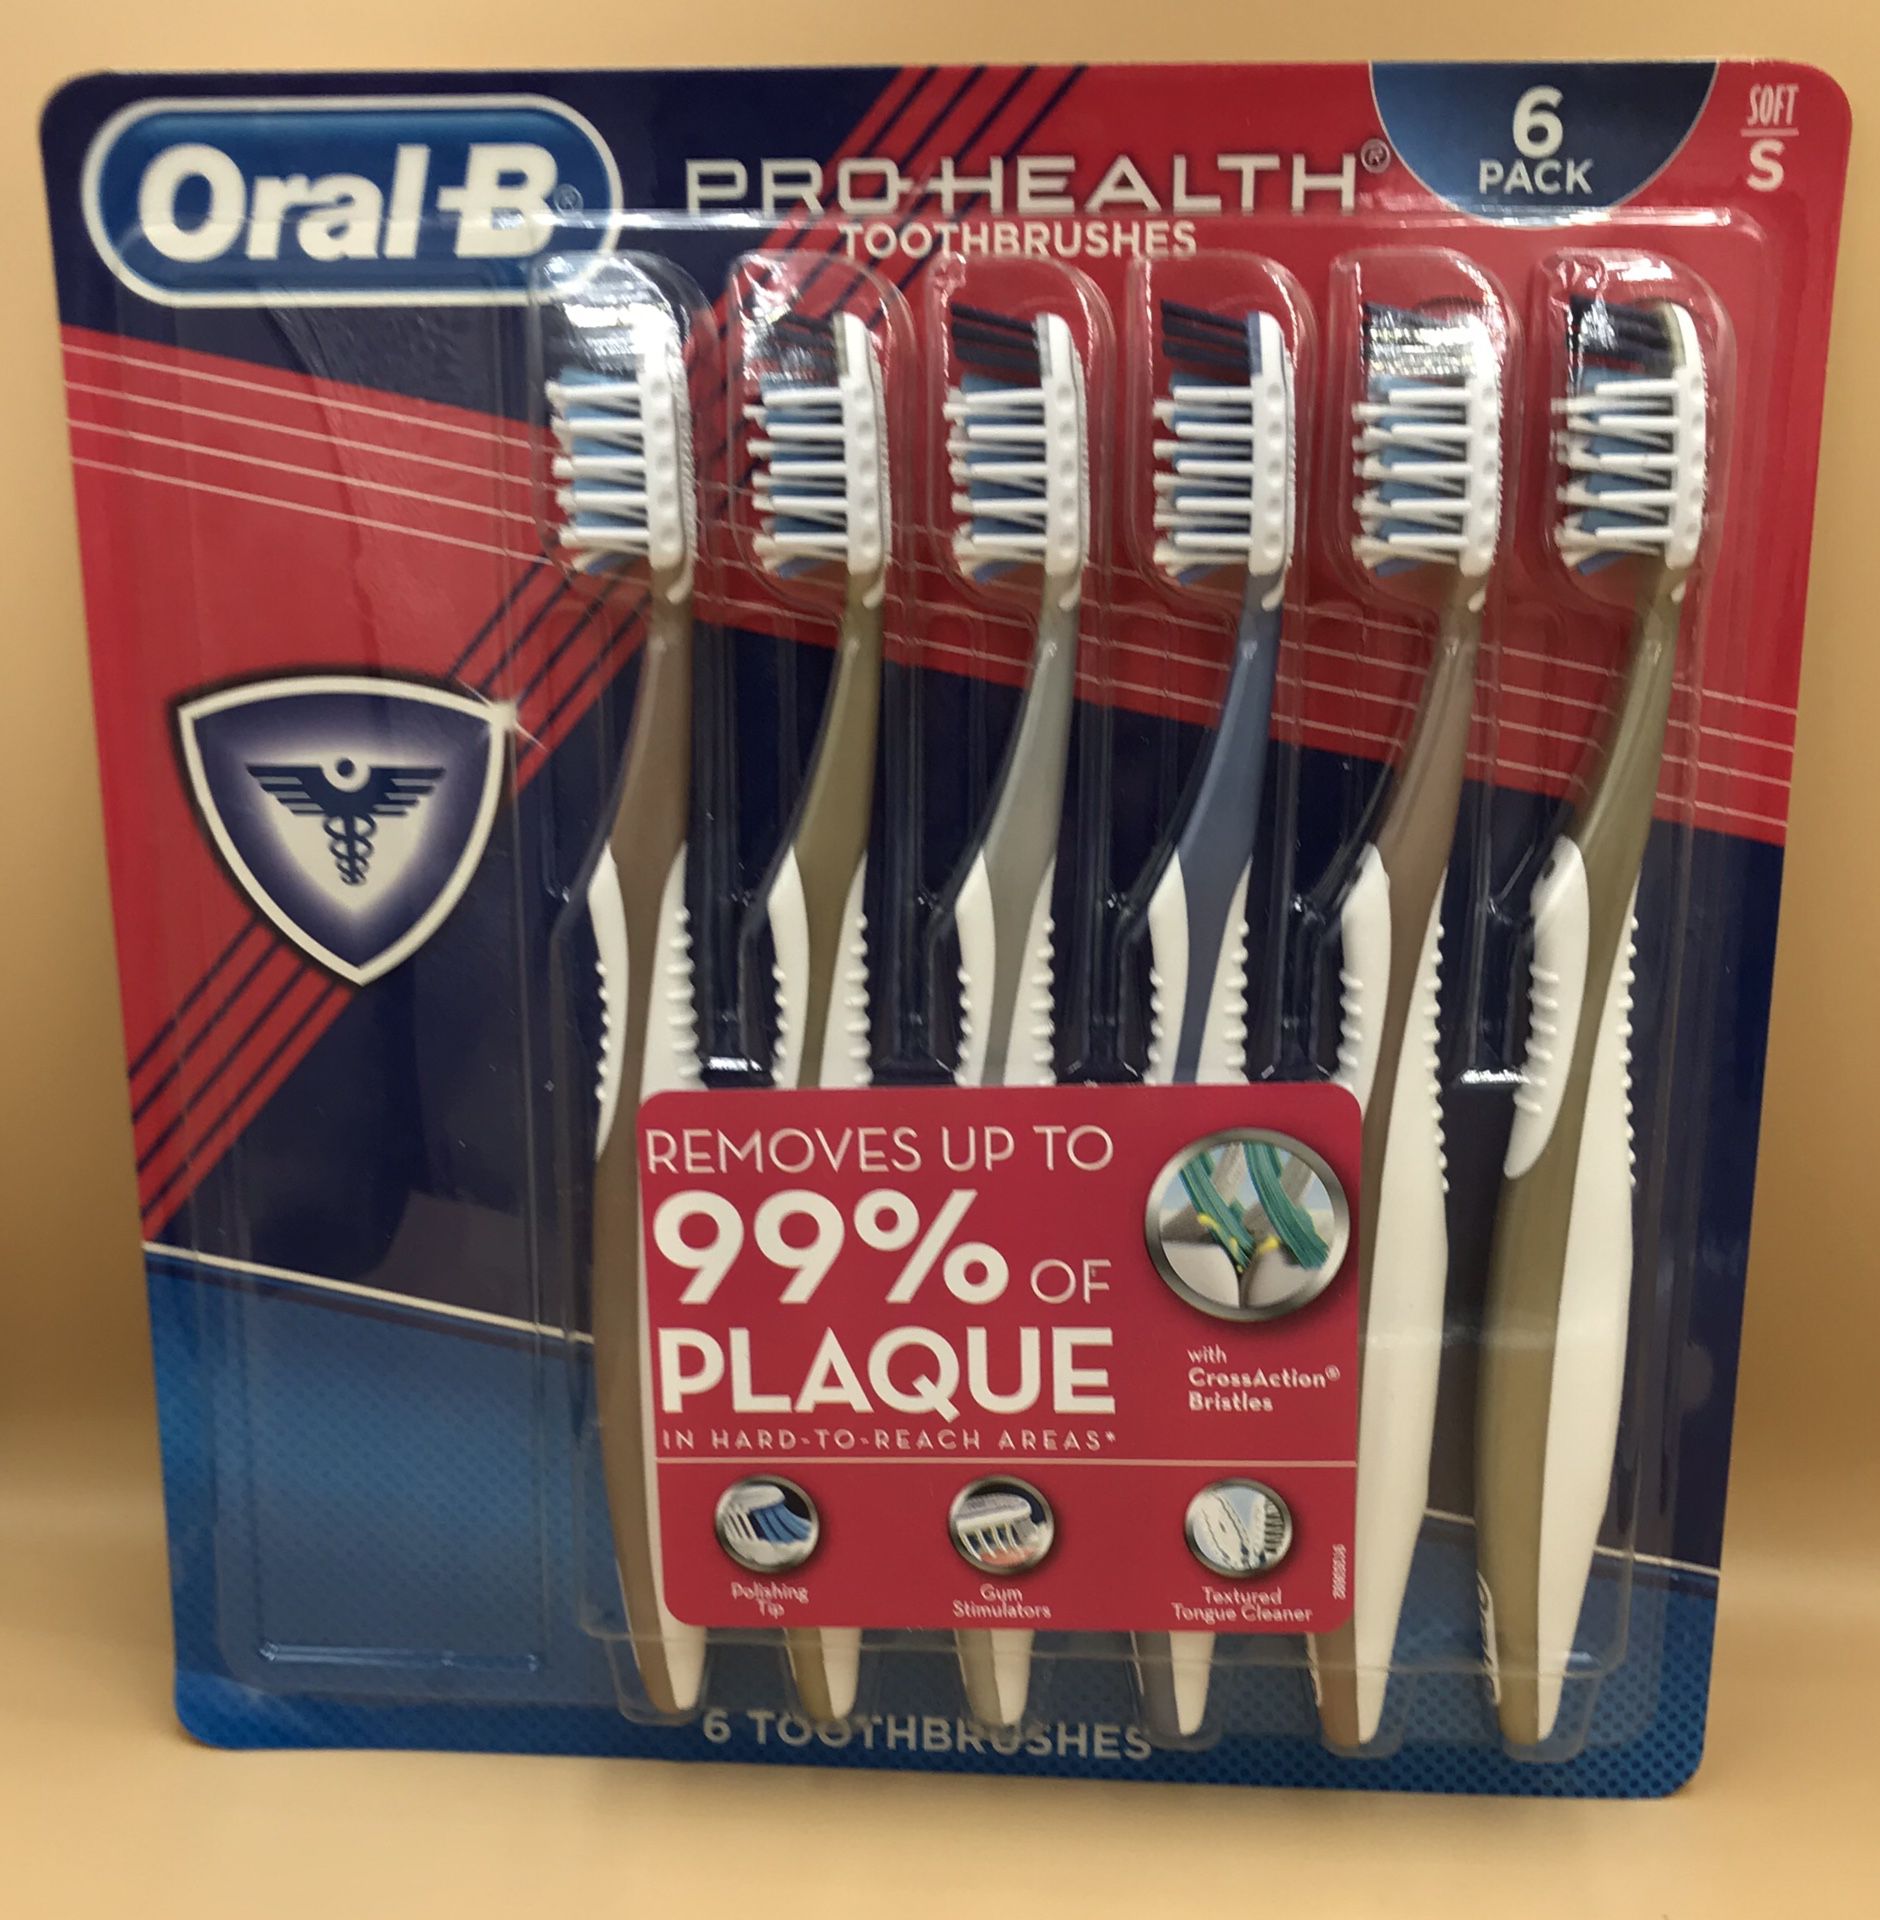 Oral-B PRO HEALTH TOOTHBRUSHES - 6 Pack, soft